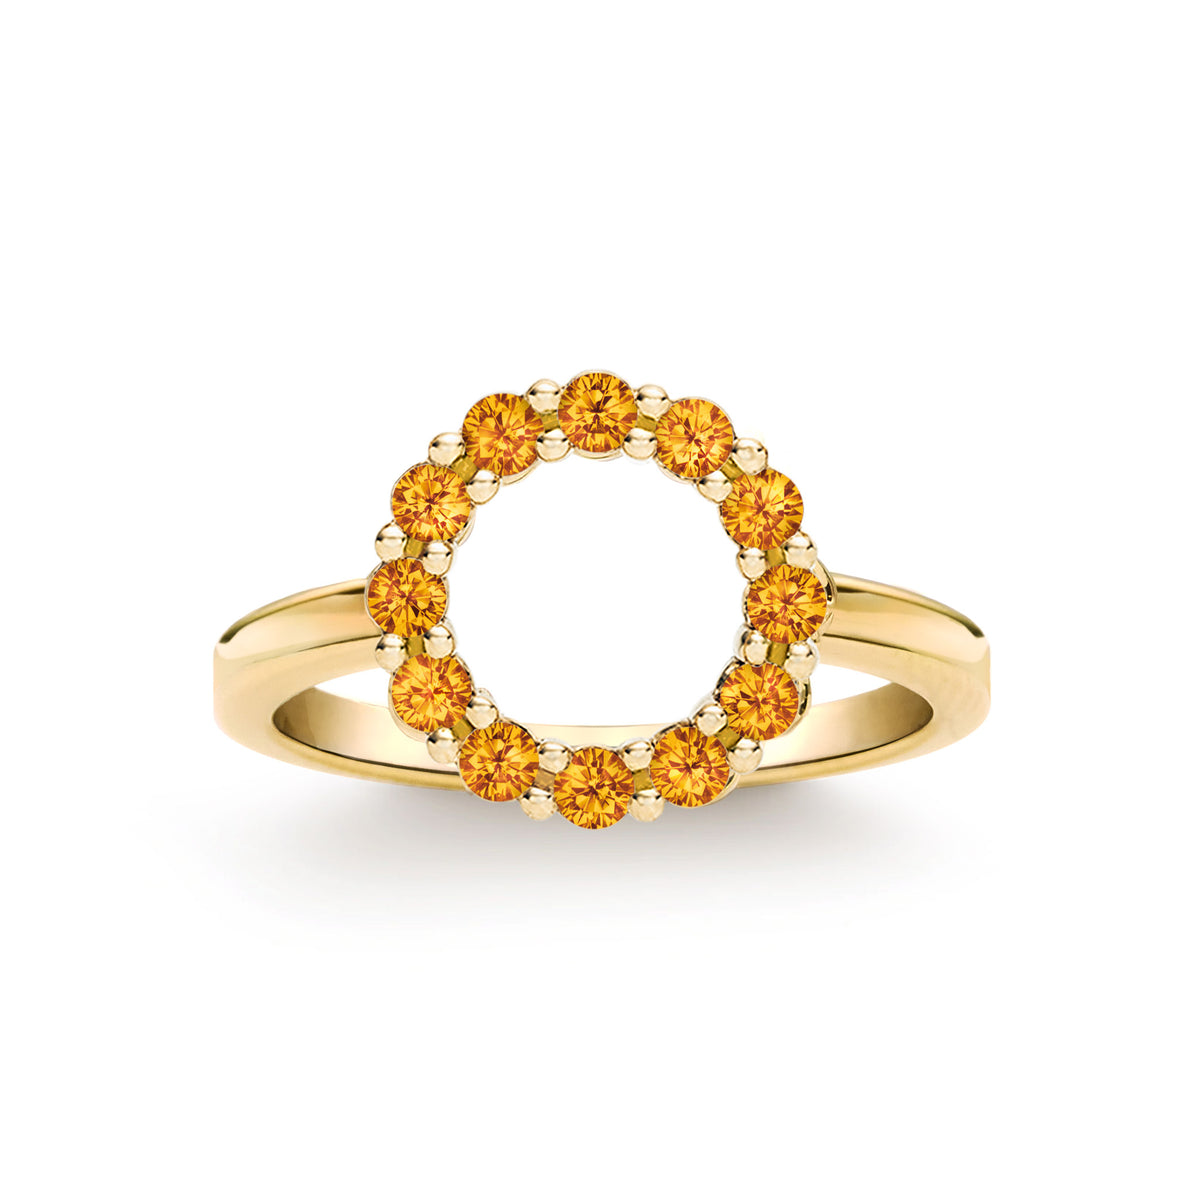 OM SHRI SAI Round Flower Shaped Gold Plated Brass  Navratna/Navratan/Navgrah/9/Nine Synthetic/Artificial Gemstone Adjustable  Ring (For Health,Wealth.Name.Fame,Prosperity,Happiness)Pack of 1 Brass Gold  Plated Ring Price in India - Buy OM SHRI SAI Round ...